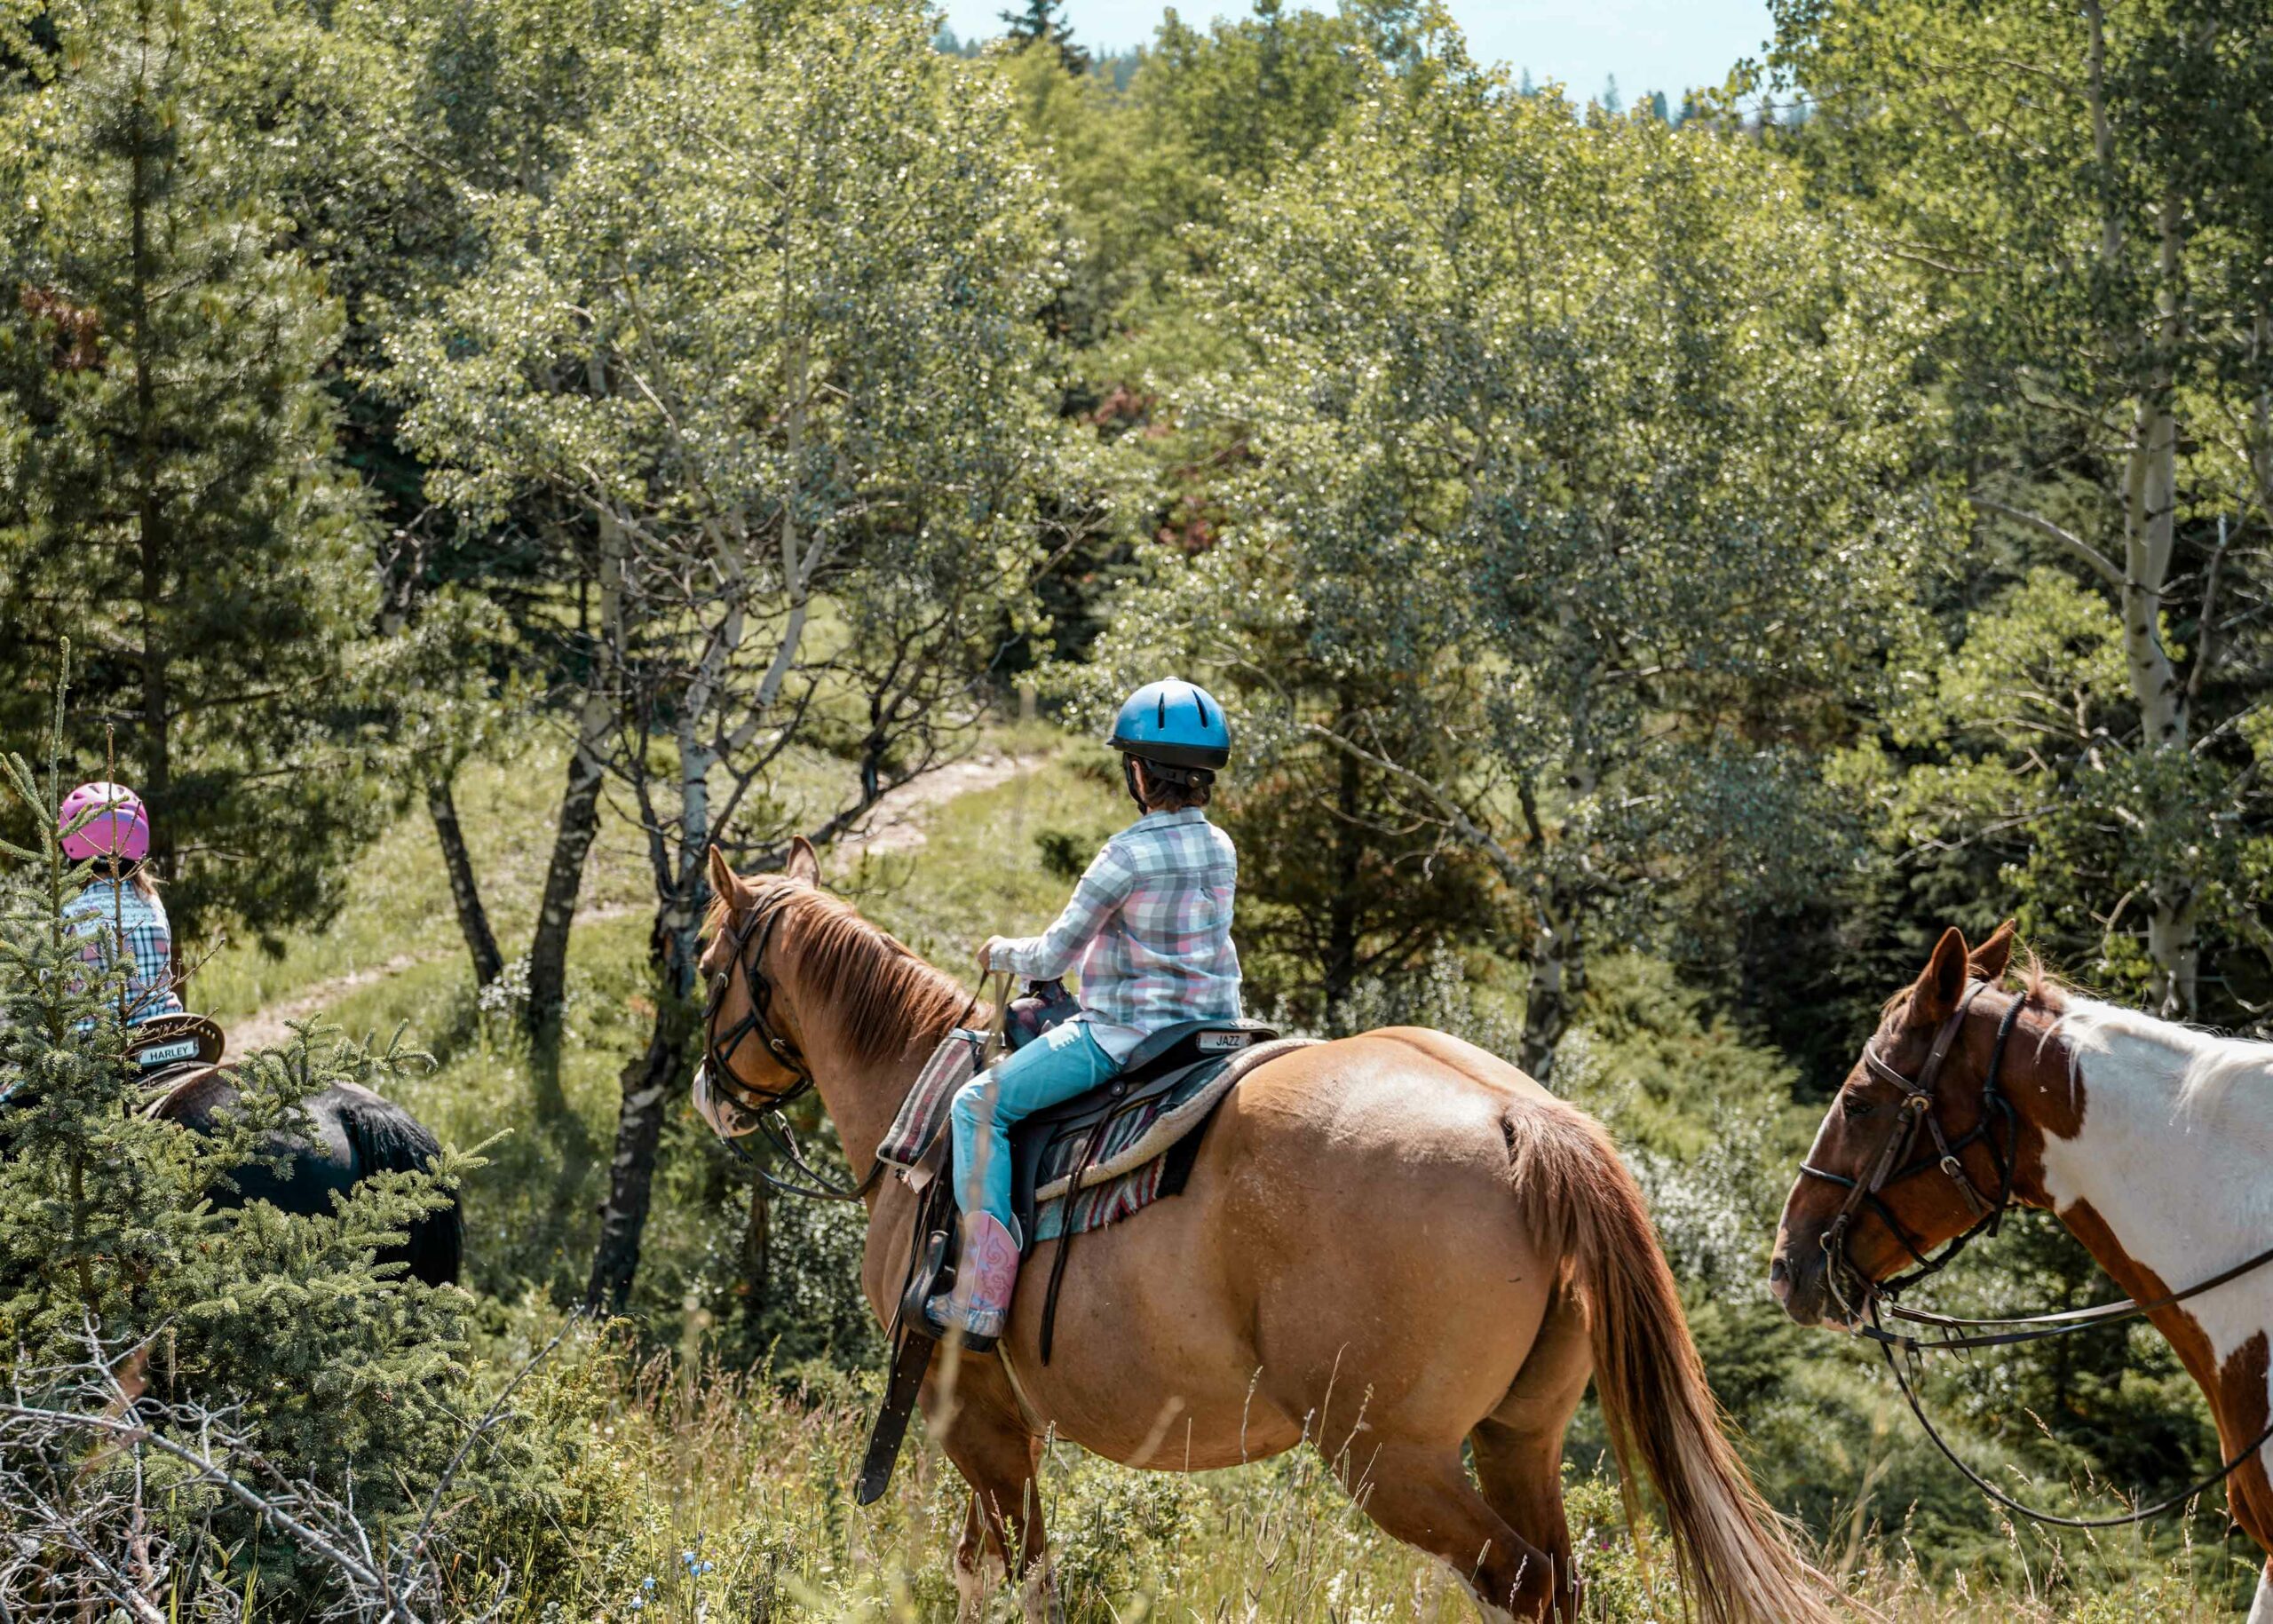 Horseback riding is a great activity to do in Jasper with kids 